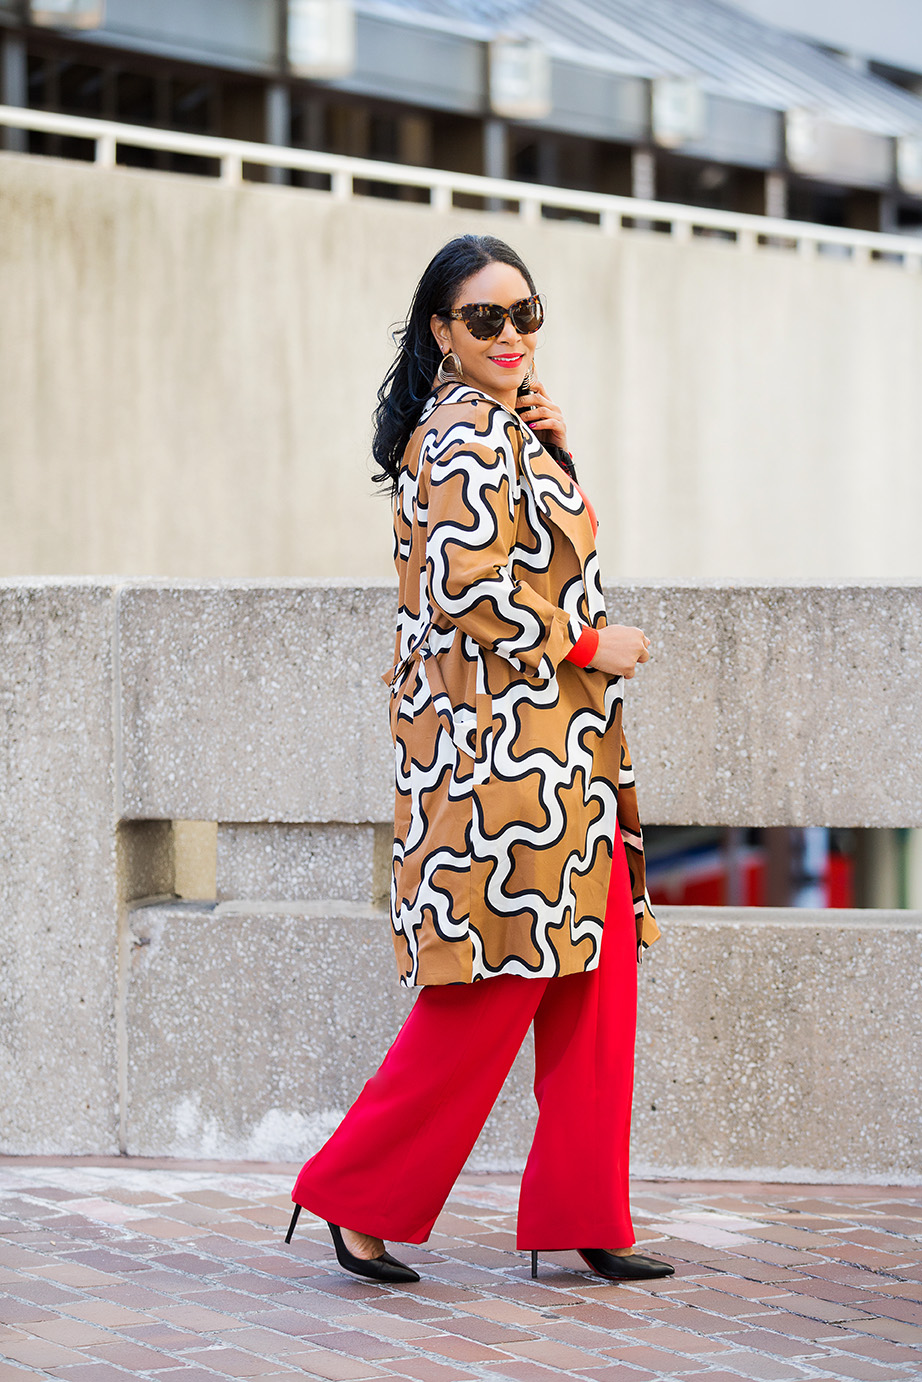 Four Ways to Tackle Mondays Like a Boss / What I'm Wearing: DvF Squiggle Print Trench coat, orange H&M Bodysuit, red H&M Suit Pants, Christian Louboutin Pigalle Pumps